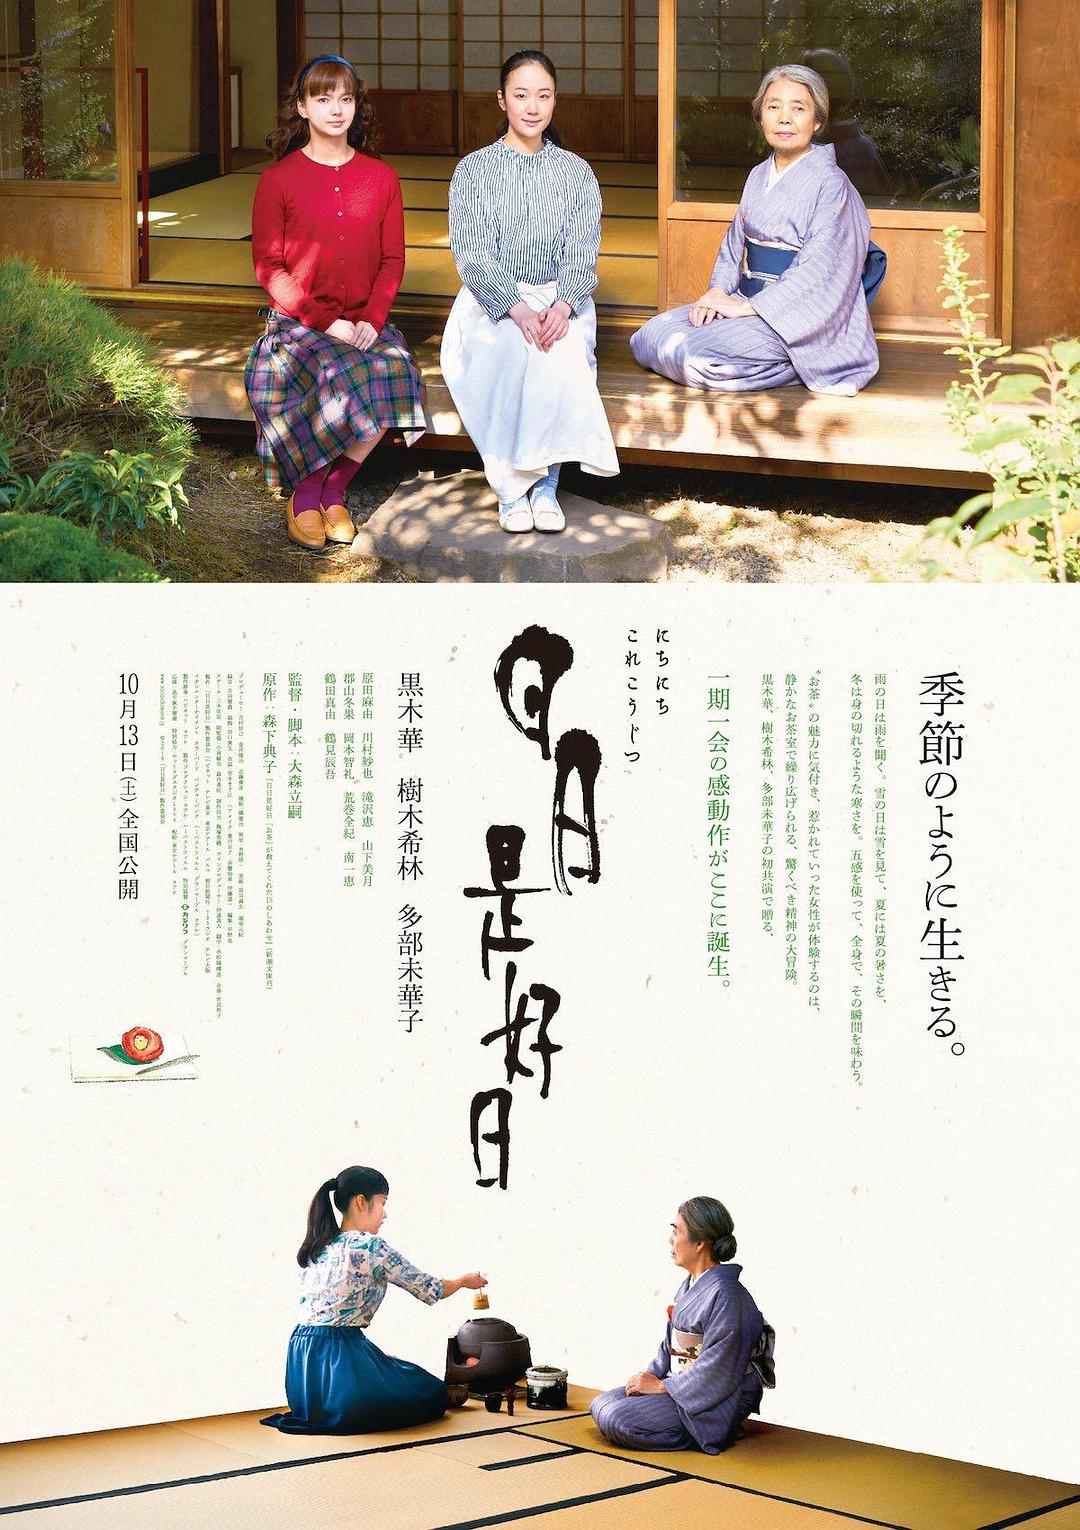 Every Day a Good Day/天天是个好日子 Every.Day.A.Good.Day.2018.JAPANESE.1080p.BluRay.x264.DTS-WiKi 8.99GB-1.png